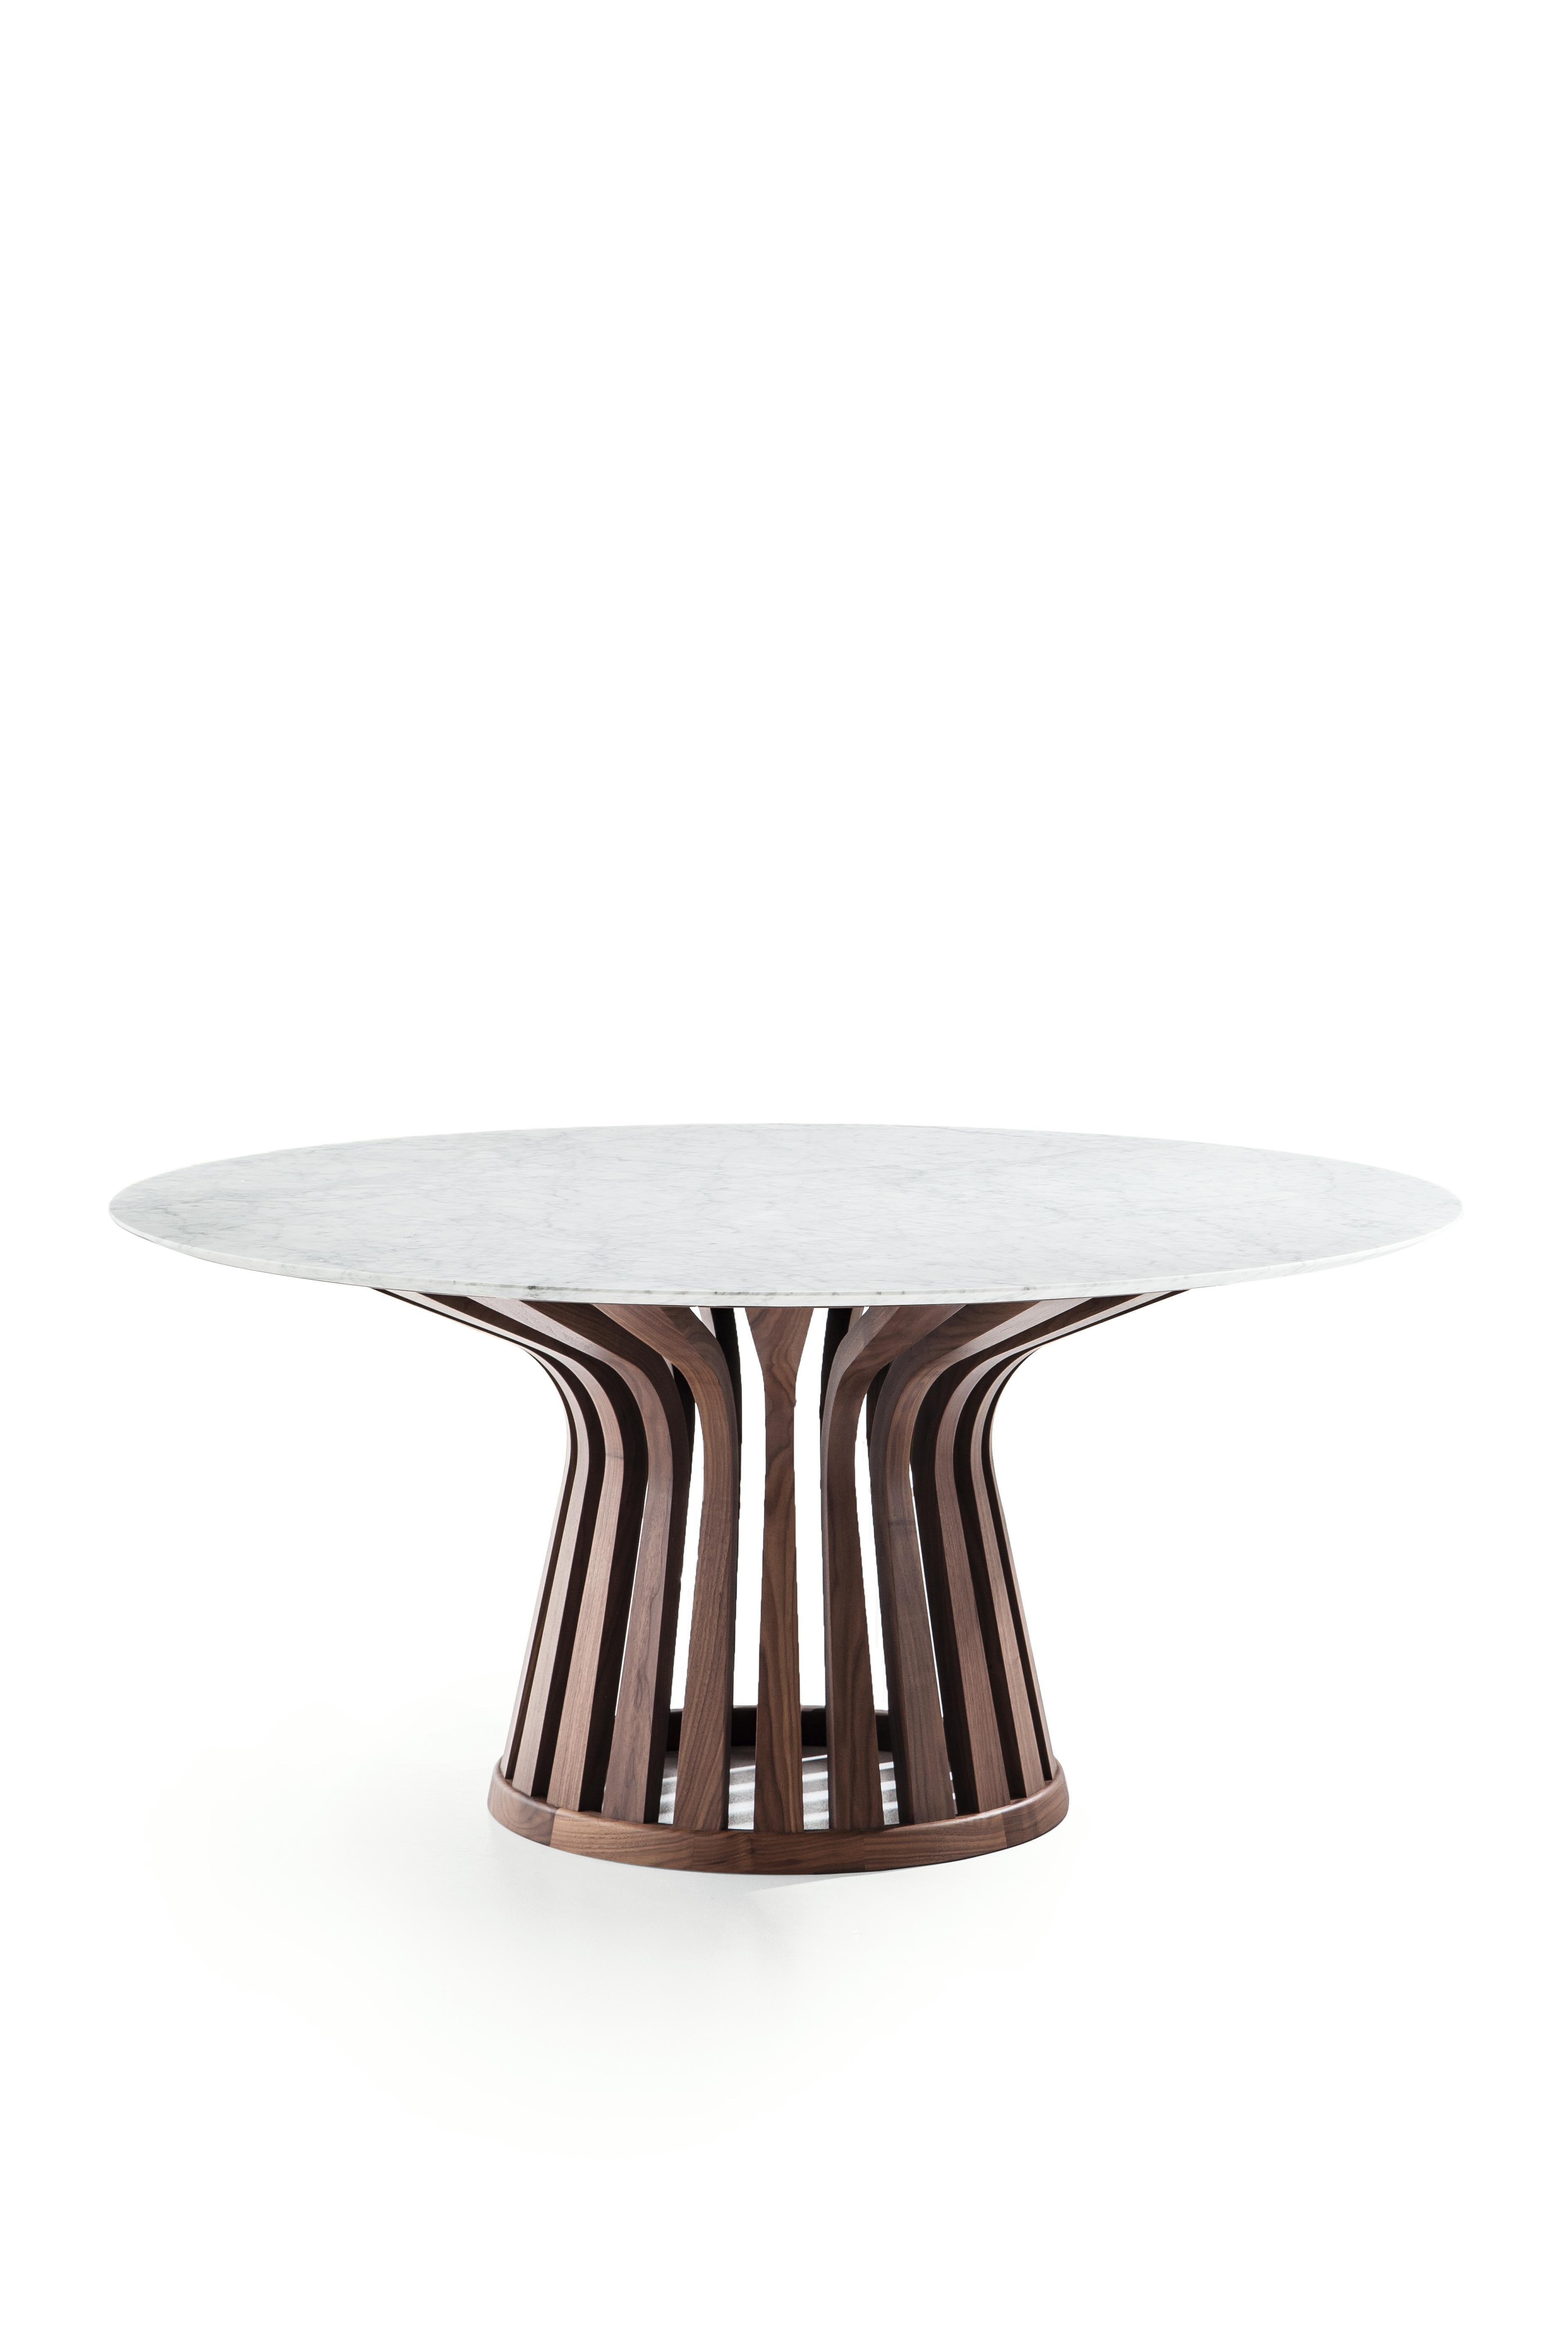 Aluminum Lebeau Wood and Glass Table by Patrick Jouin For Sale